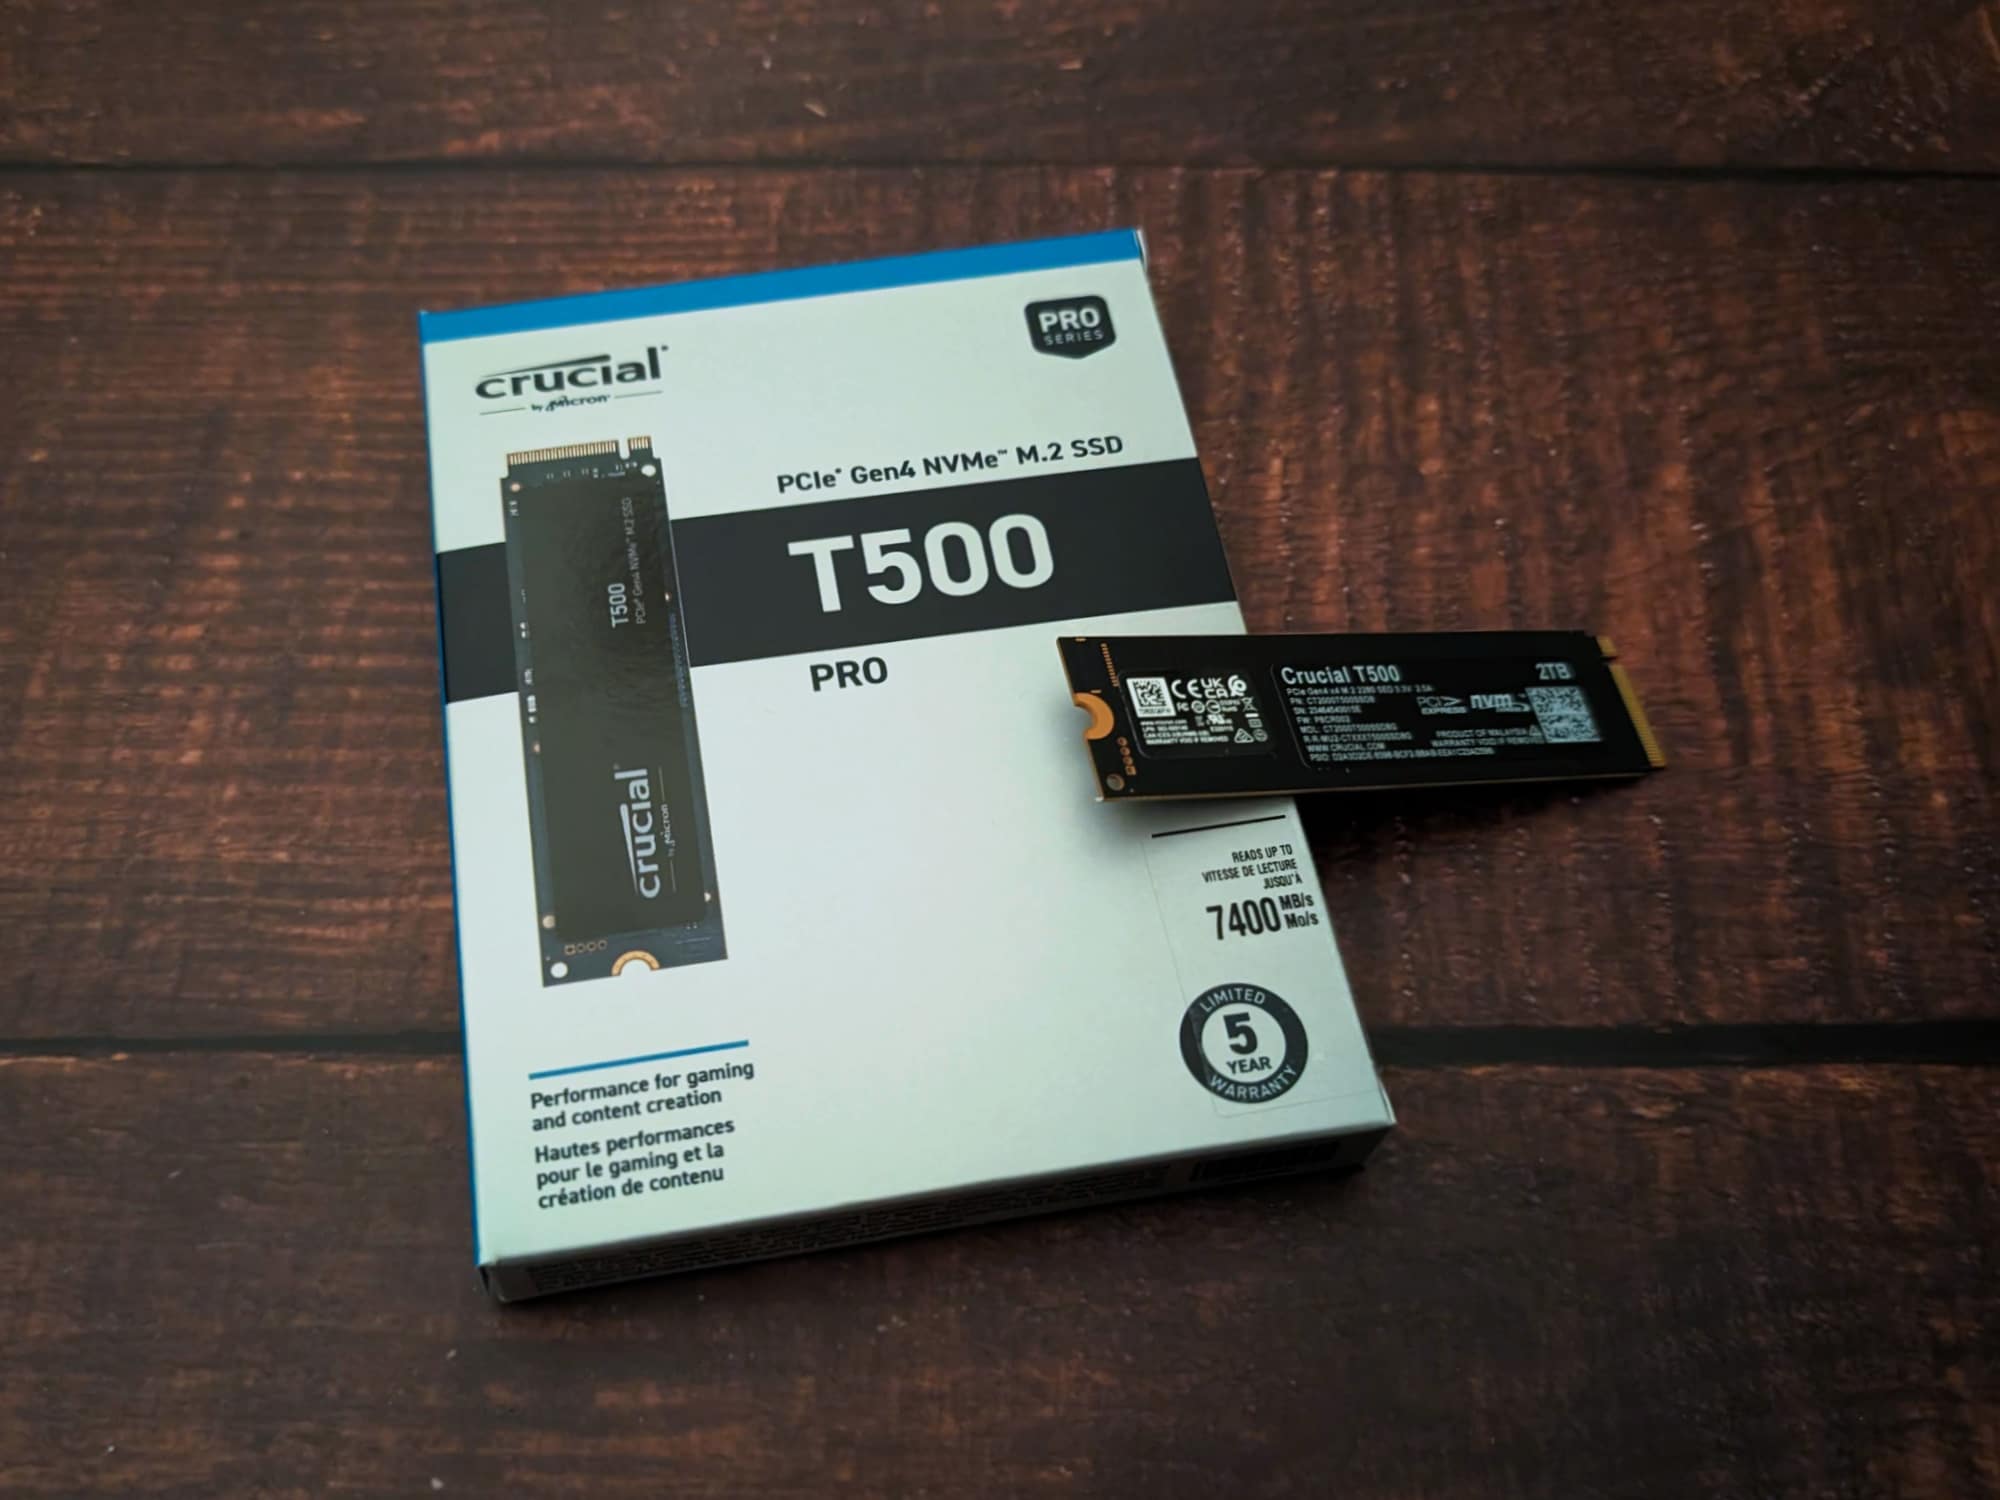 Crucial T500 500GB PCIe Gen4 NVMe M.2 SSD | CT500T500SSD8 | Crucial UK